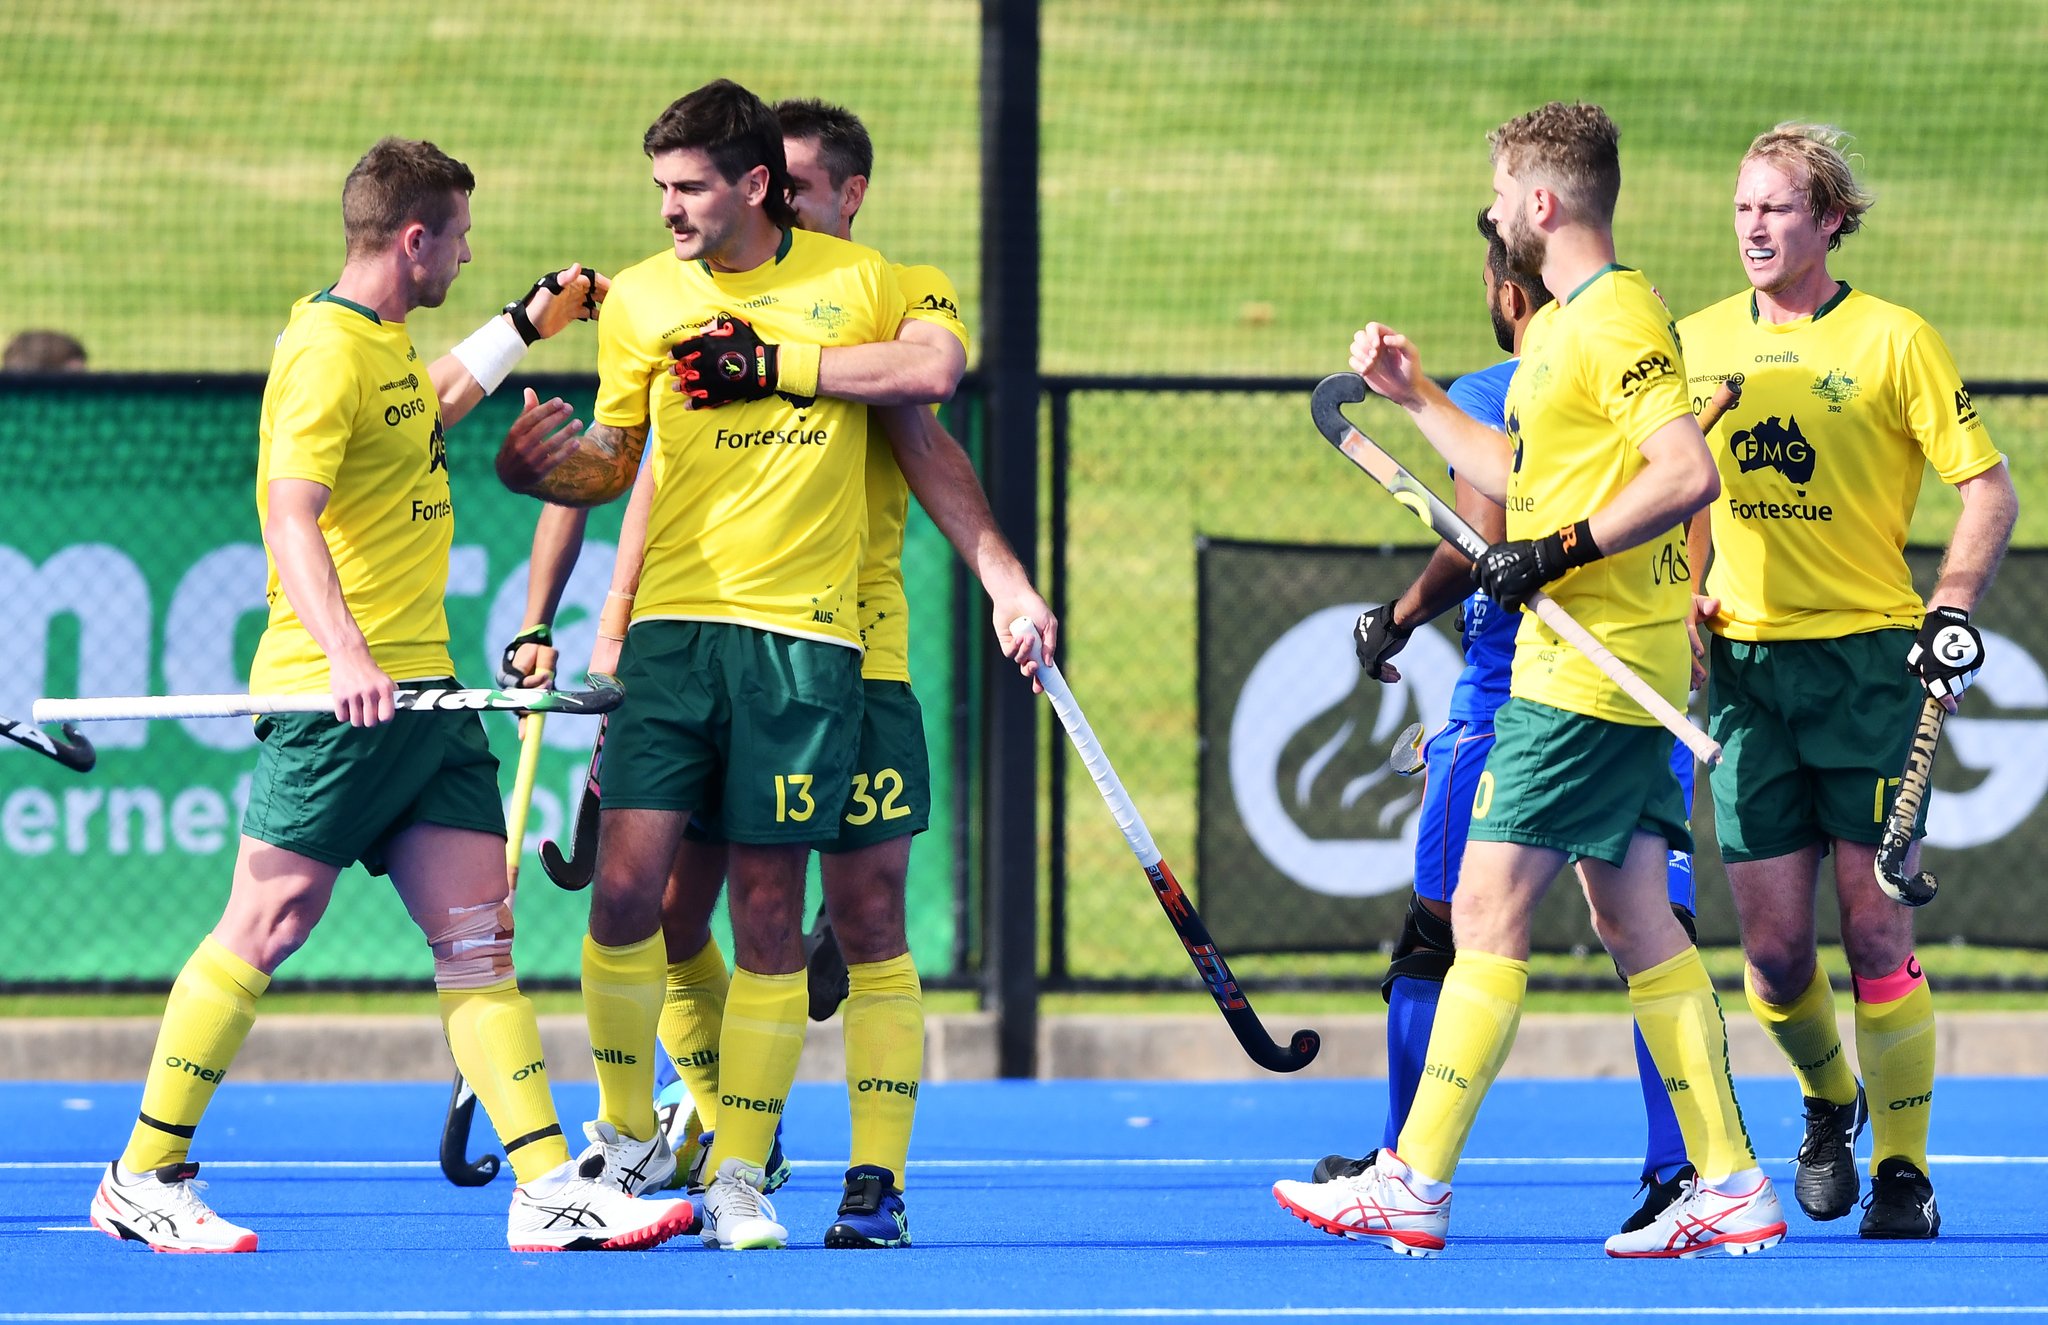 australia-defeat-india-7-4-in-second-hockey-test-match-at-adelaide